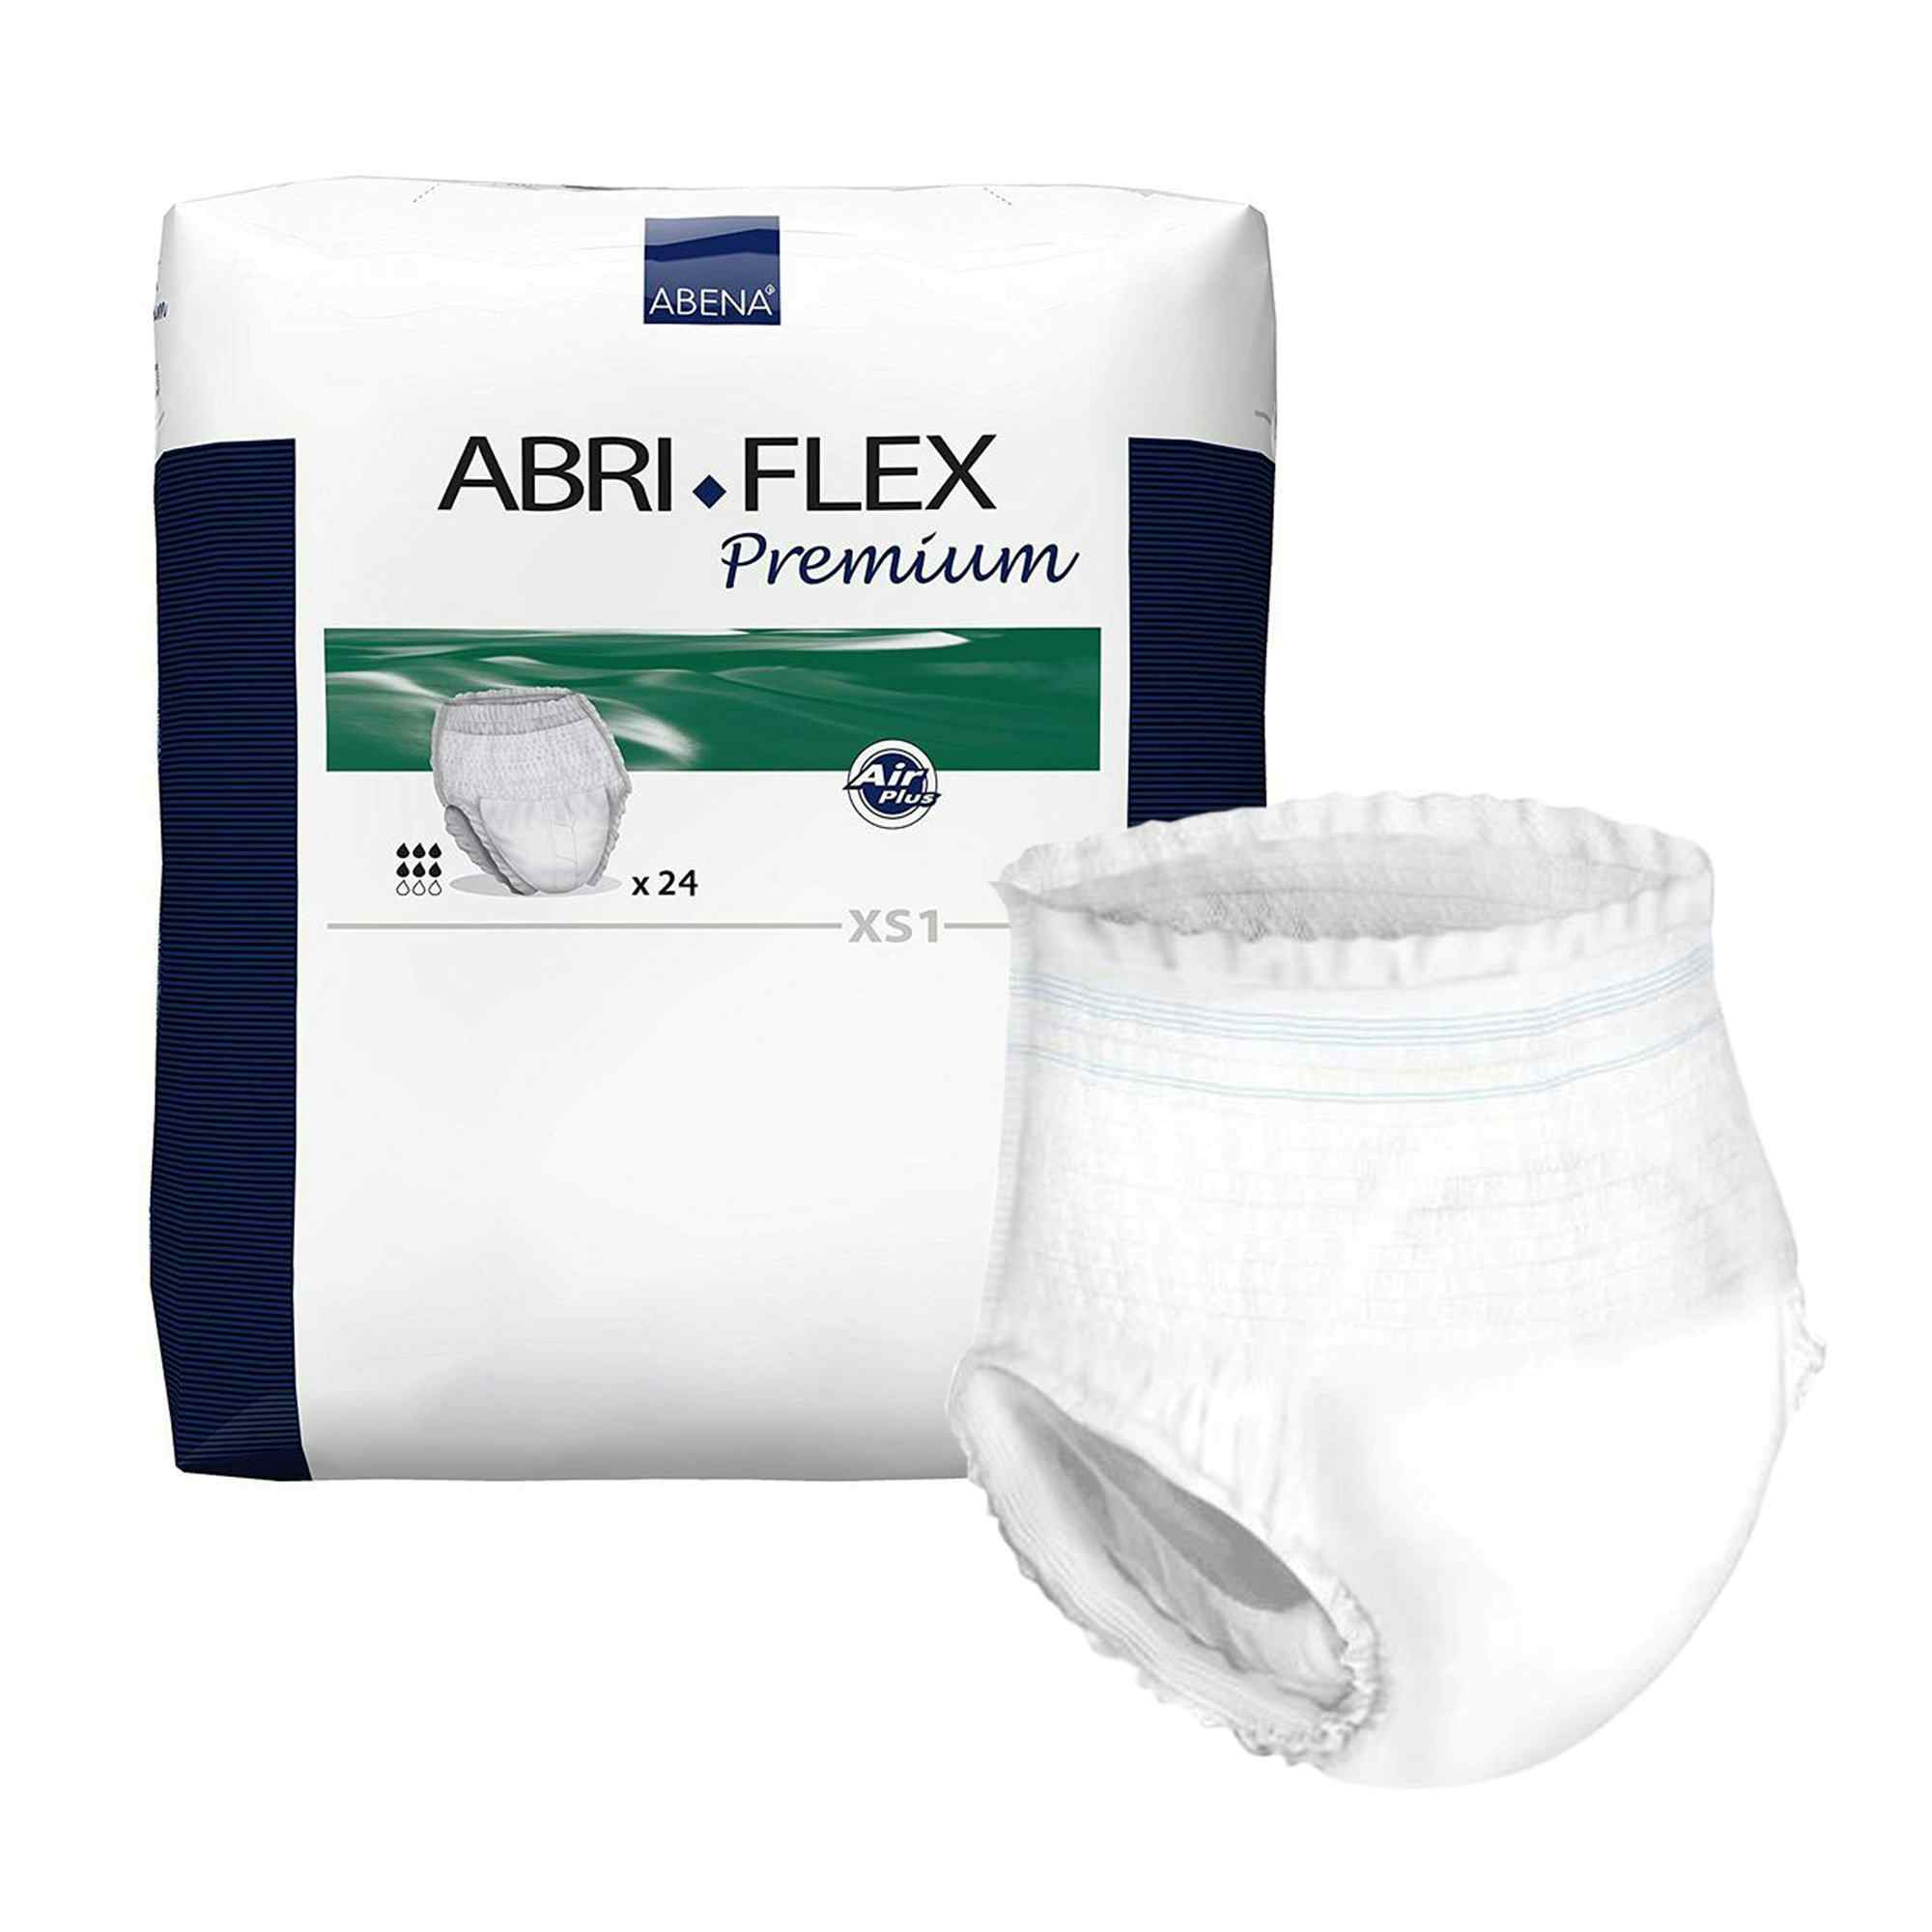 Abri-Flex Premium XS1 Unisex Adult Disposable Pull On Diaper, Moderate Absorbency, 1000003163, X-Small (17.5-27.5") - Bag of 24